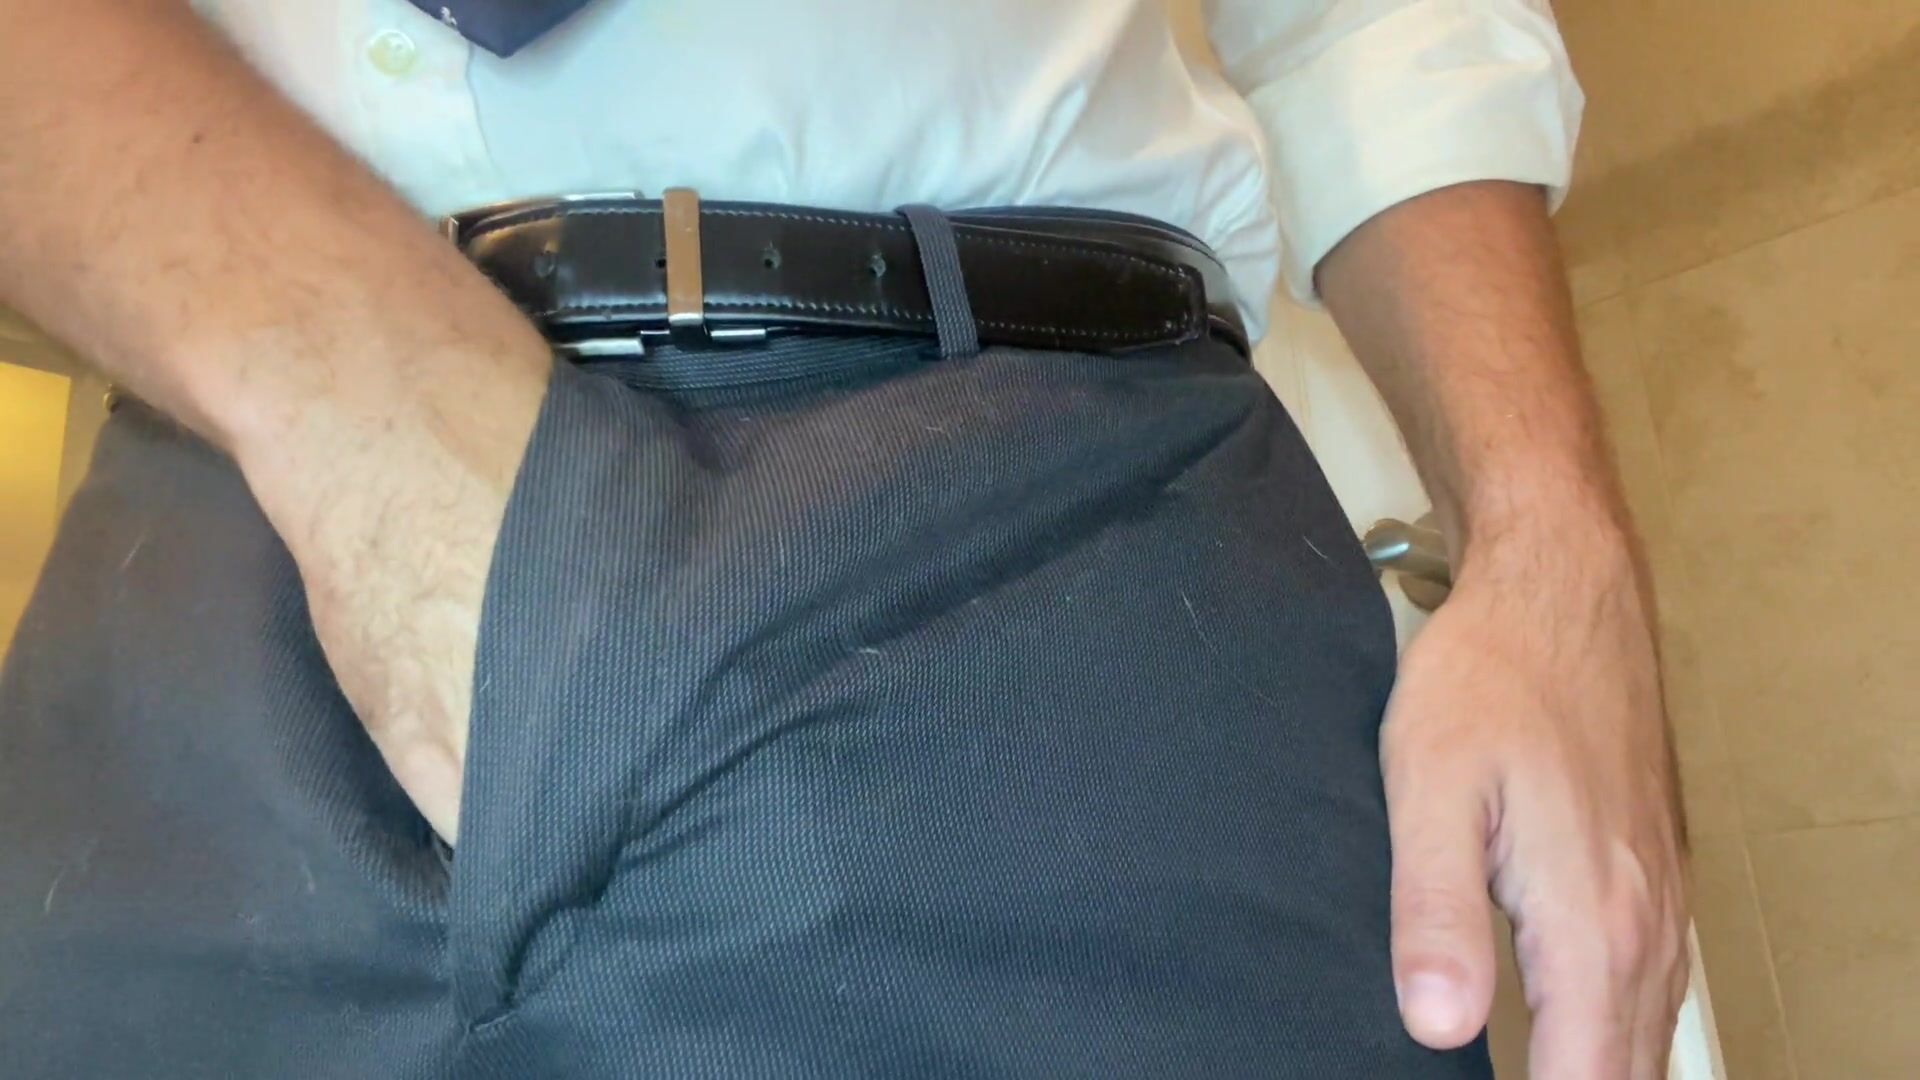 Male masturbation with suit watch online photo pic